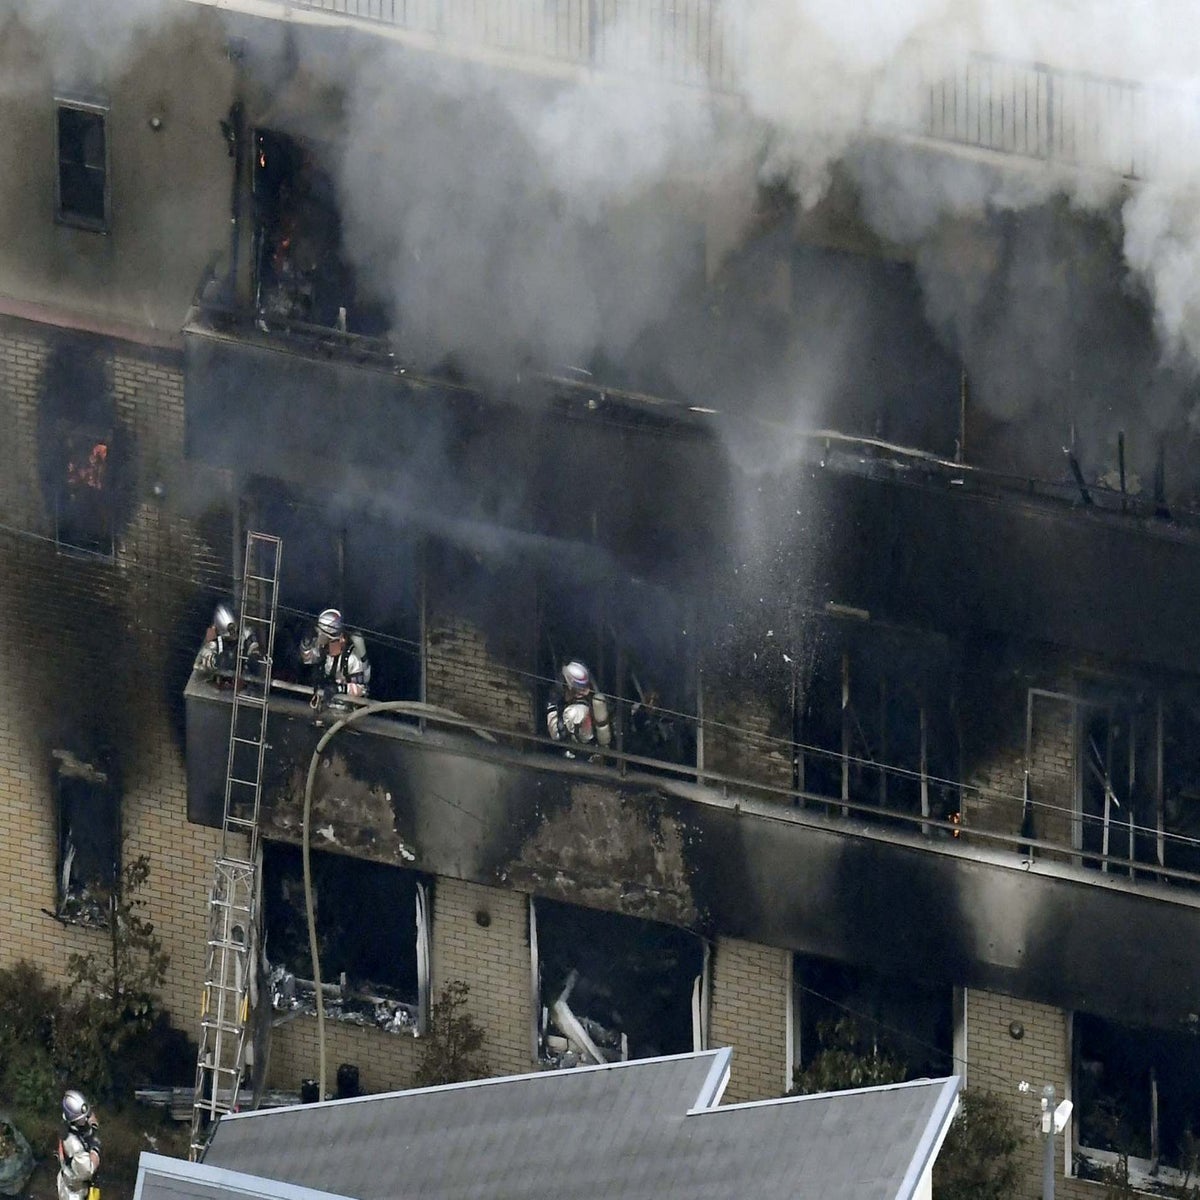 Kyoto Animation fire: Fundraiser set up to 'help heal' Japanese anime  studio after deadly blaze | The Independent | The Independent